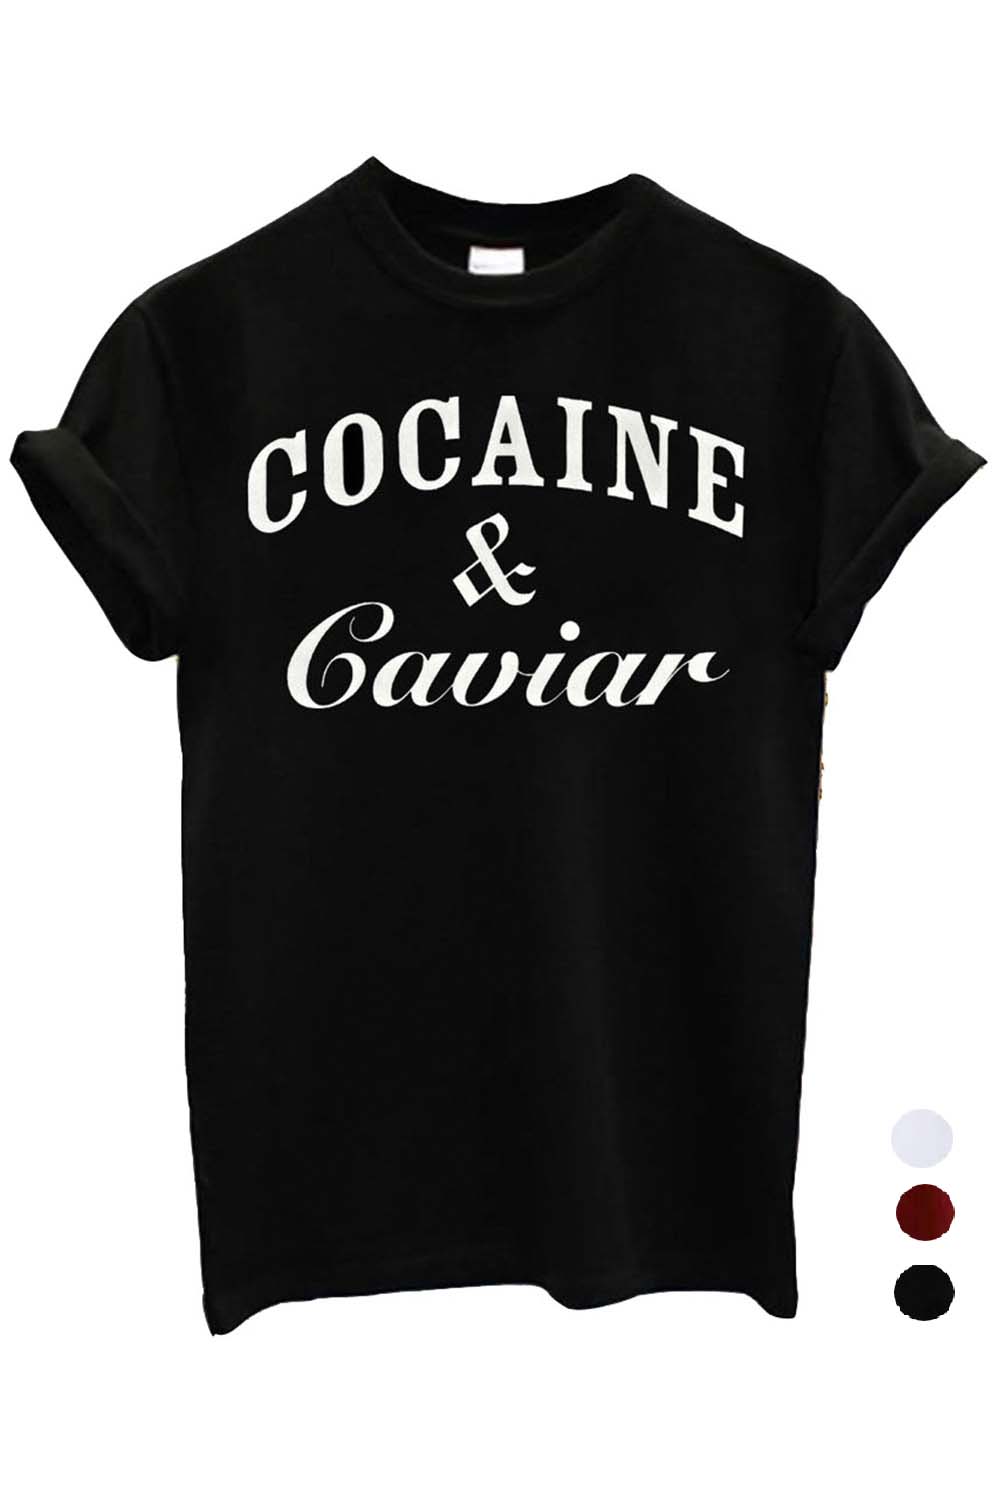 sav Hold op dollar Cocaine And Caviar Unisex T-shirt Swag Hipster Castles Crooks Yolo Dope  Tumblr - Pepper Tree London